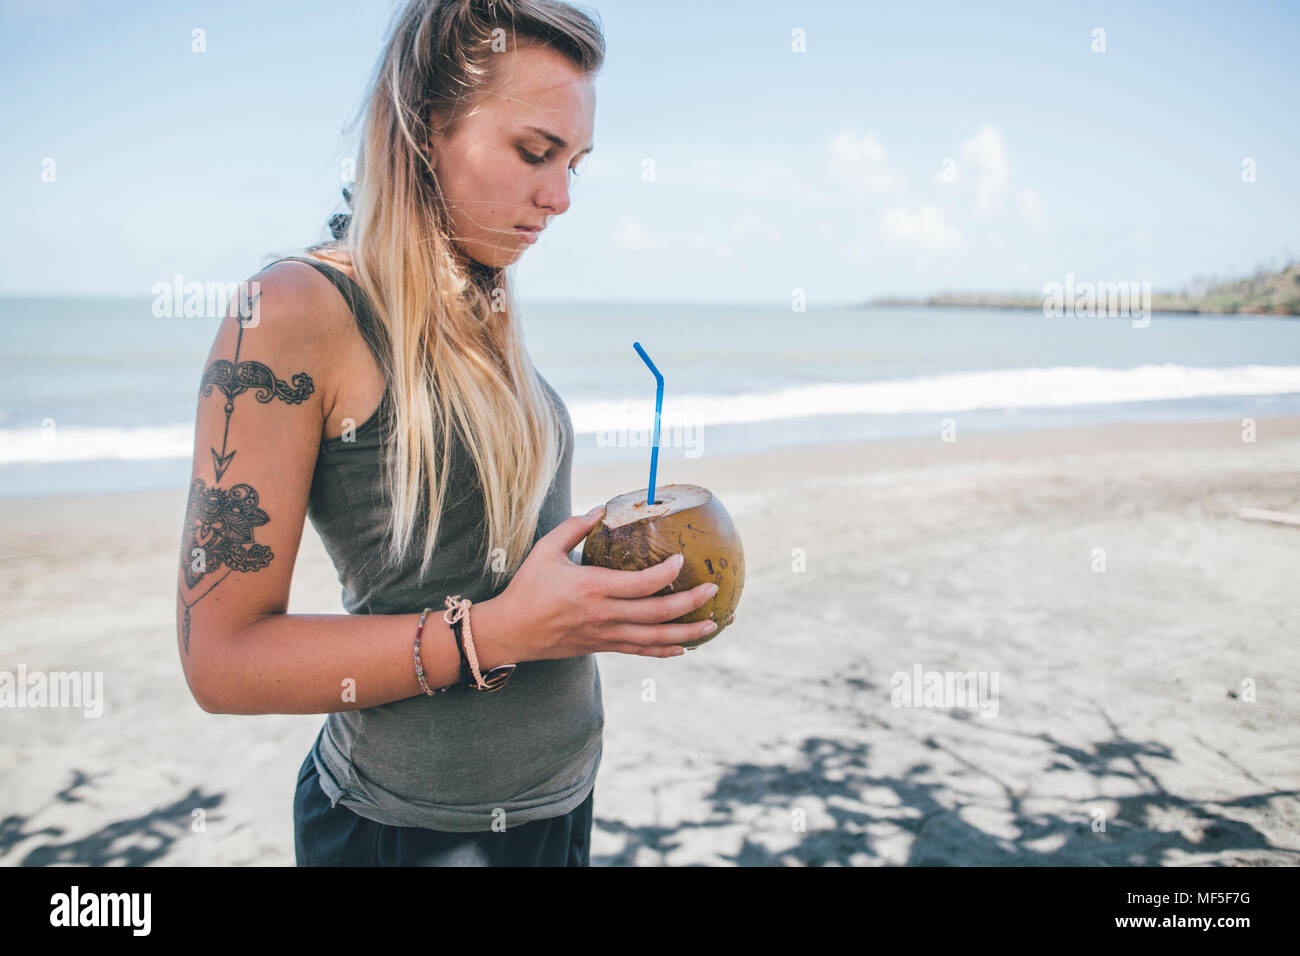 Cuba, Young woman with tattoo at Playa de Miel drinking coconut water Stock Photo